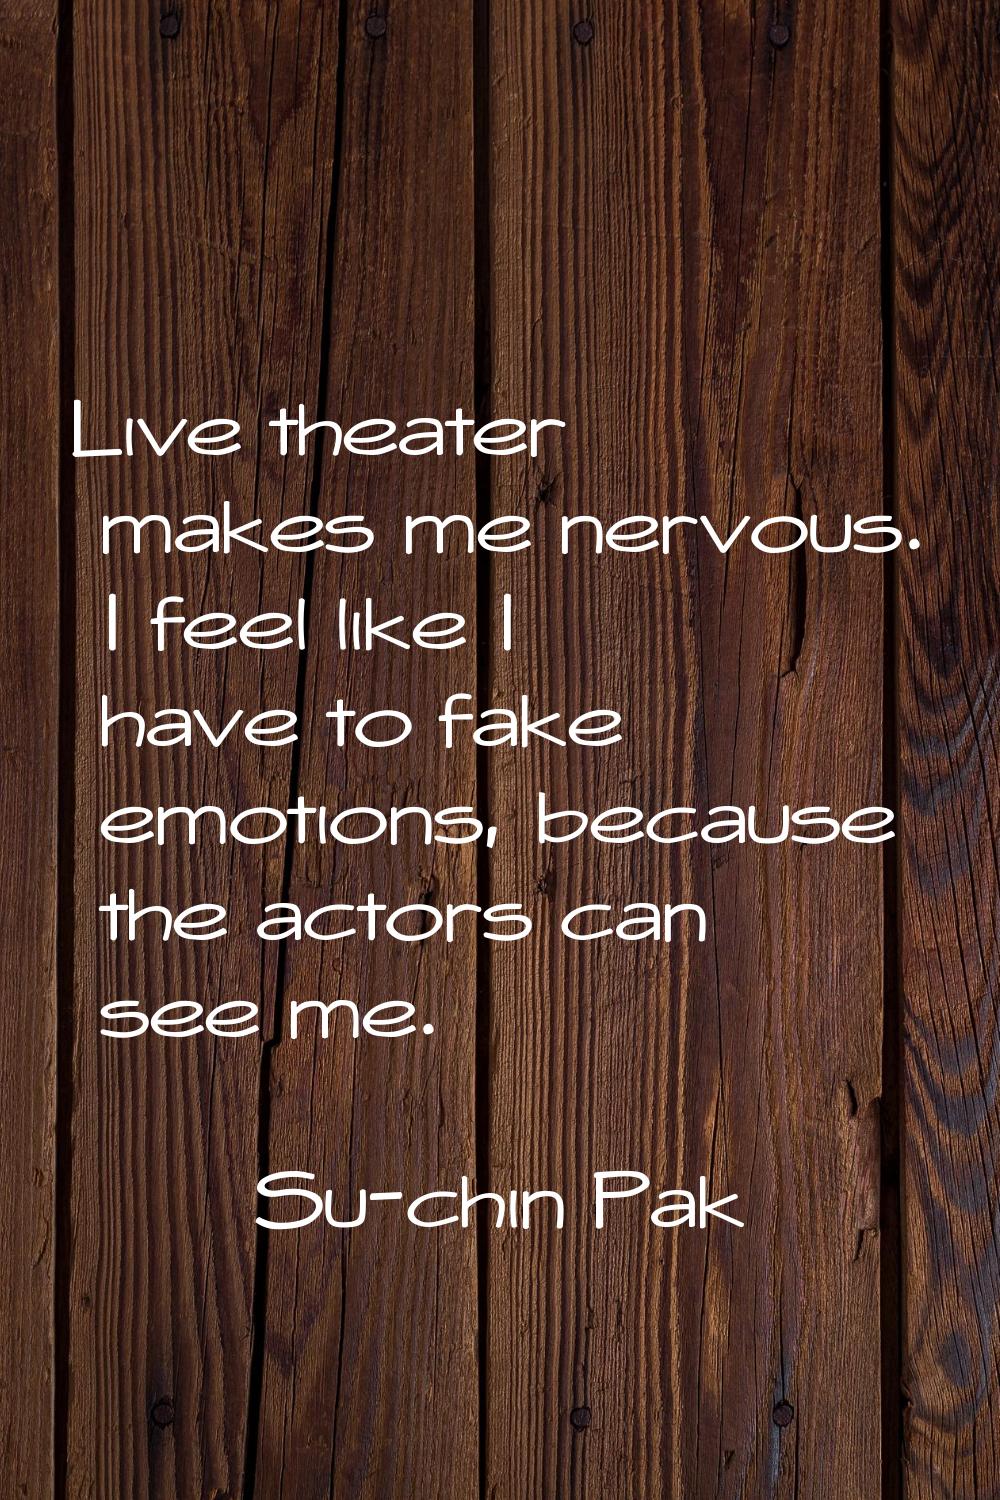 Live theater makes me nervous. I feel like I have to fake emotions, because the actors can see me.